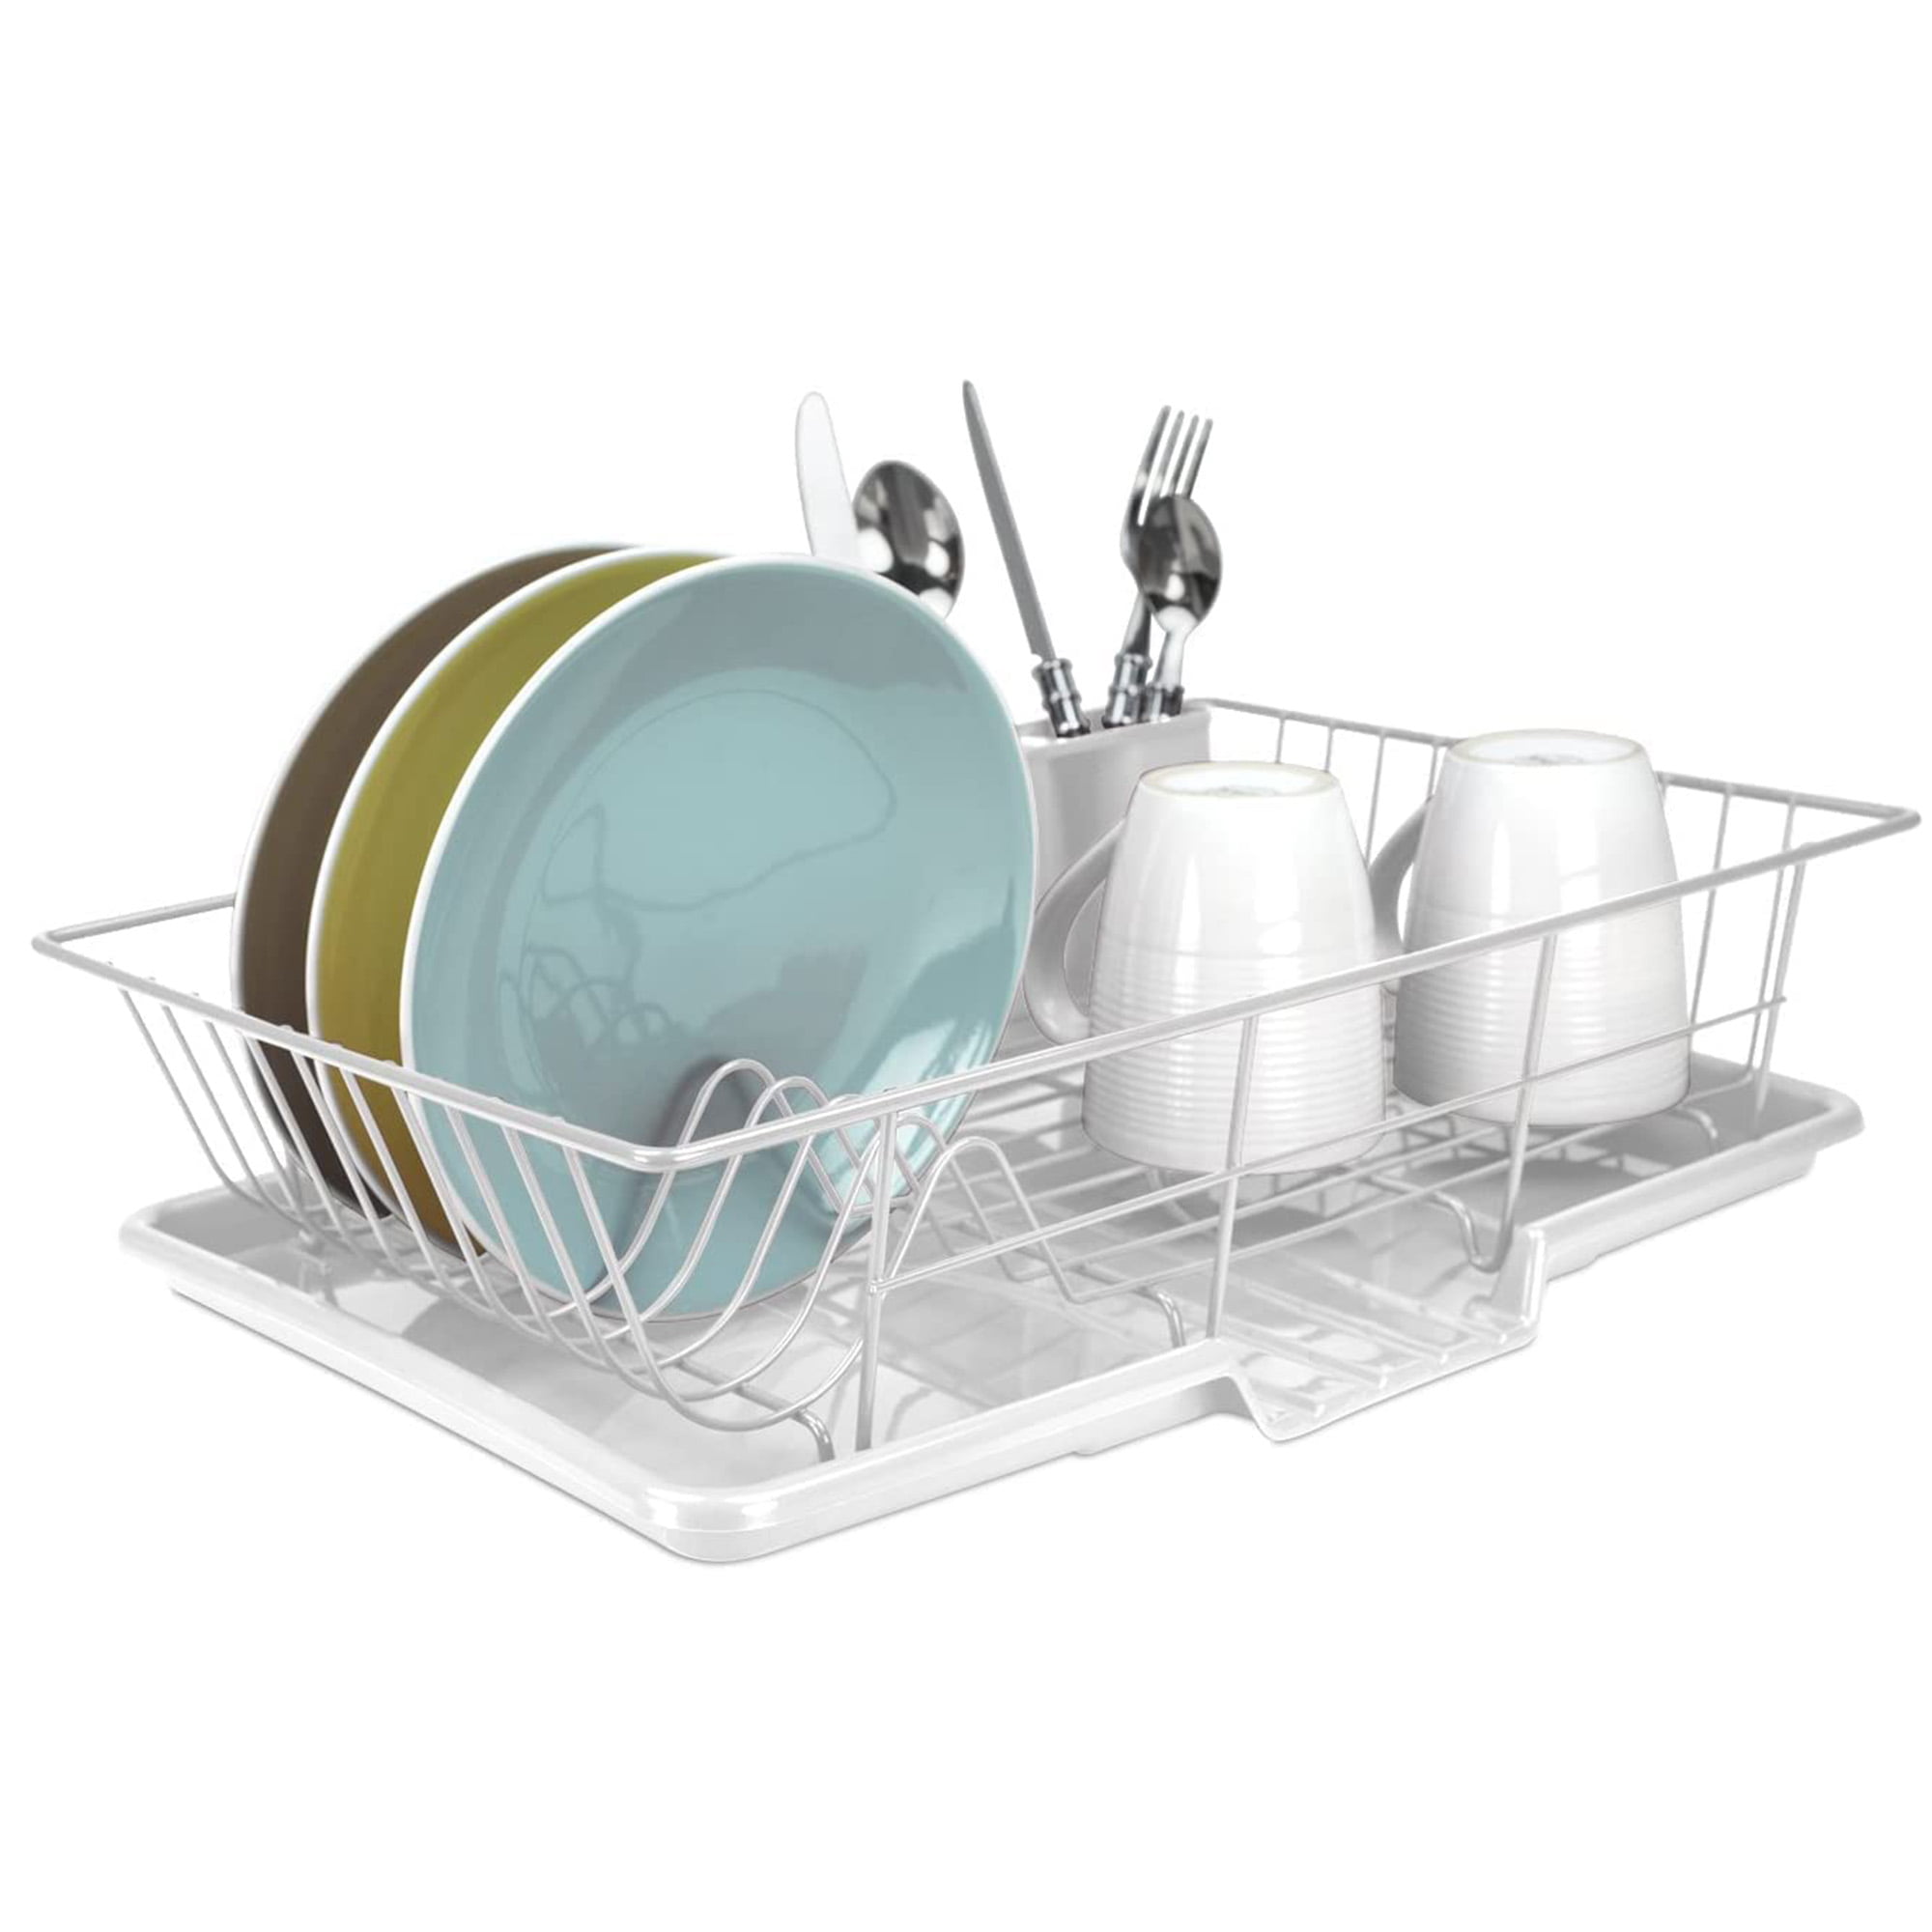 Joey'z 3-Pc Extra Large Dish Drying Rack with Drainboard and Utensil Holder  Set, Red - AliExpress